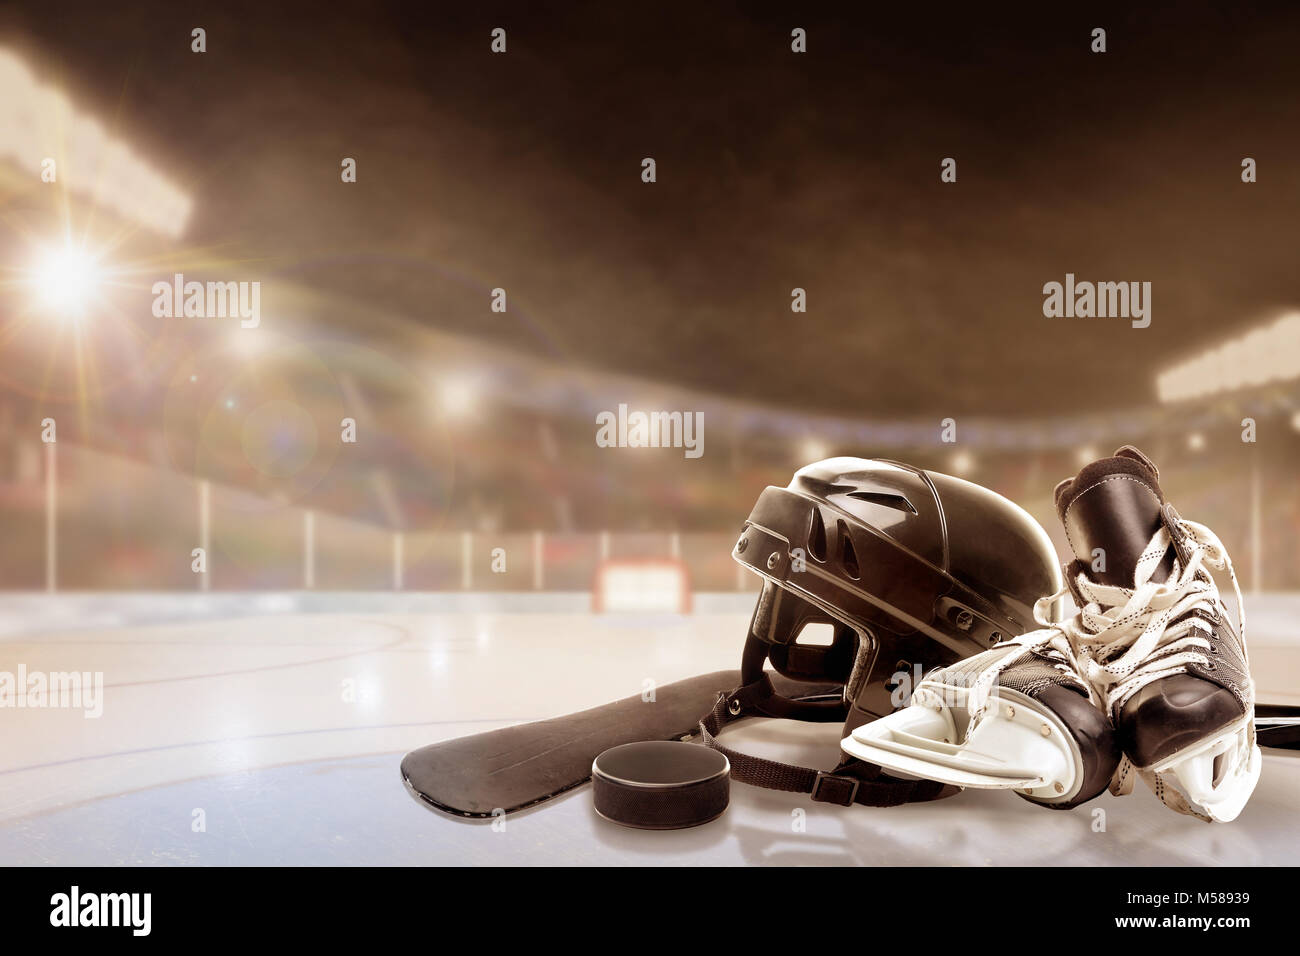 Ice hockey helmet, skates, stick and puck in brightly lit outdoor stadium with focus on foreground and shallow depth of field on background. Deliberat Stock Photo